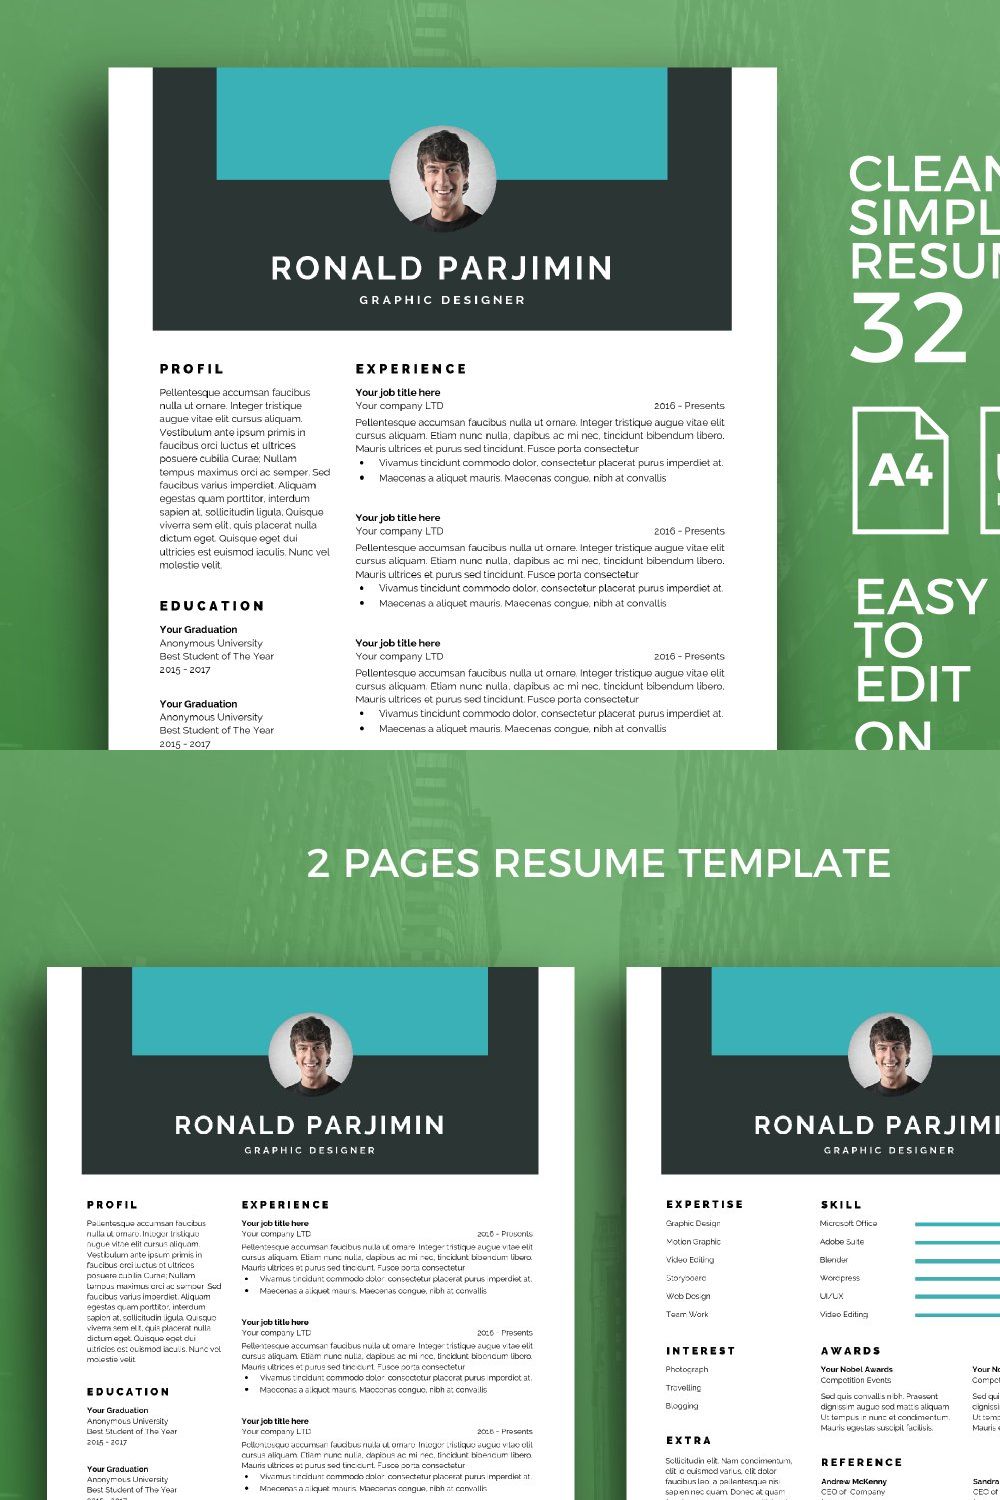 Resume Template 32 pinterest preview image.